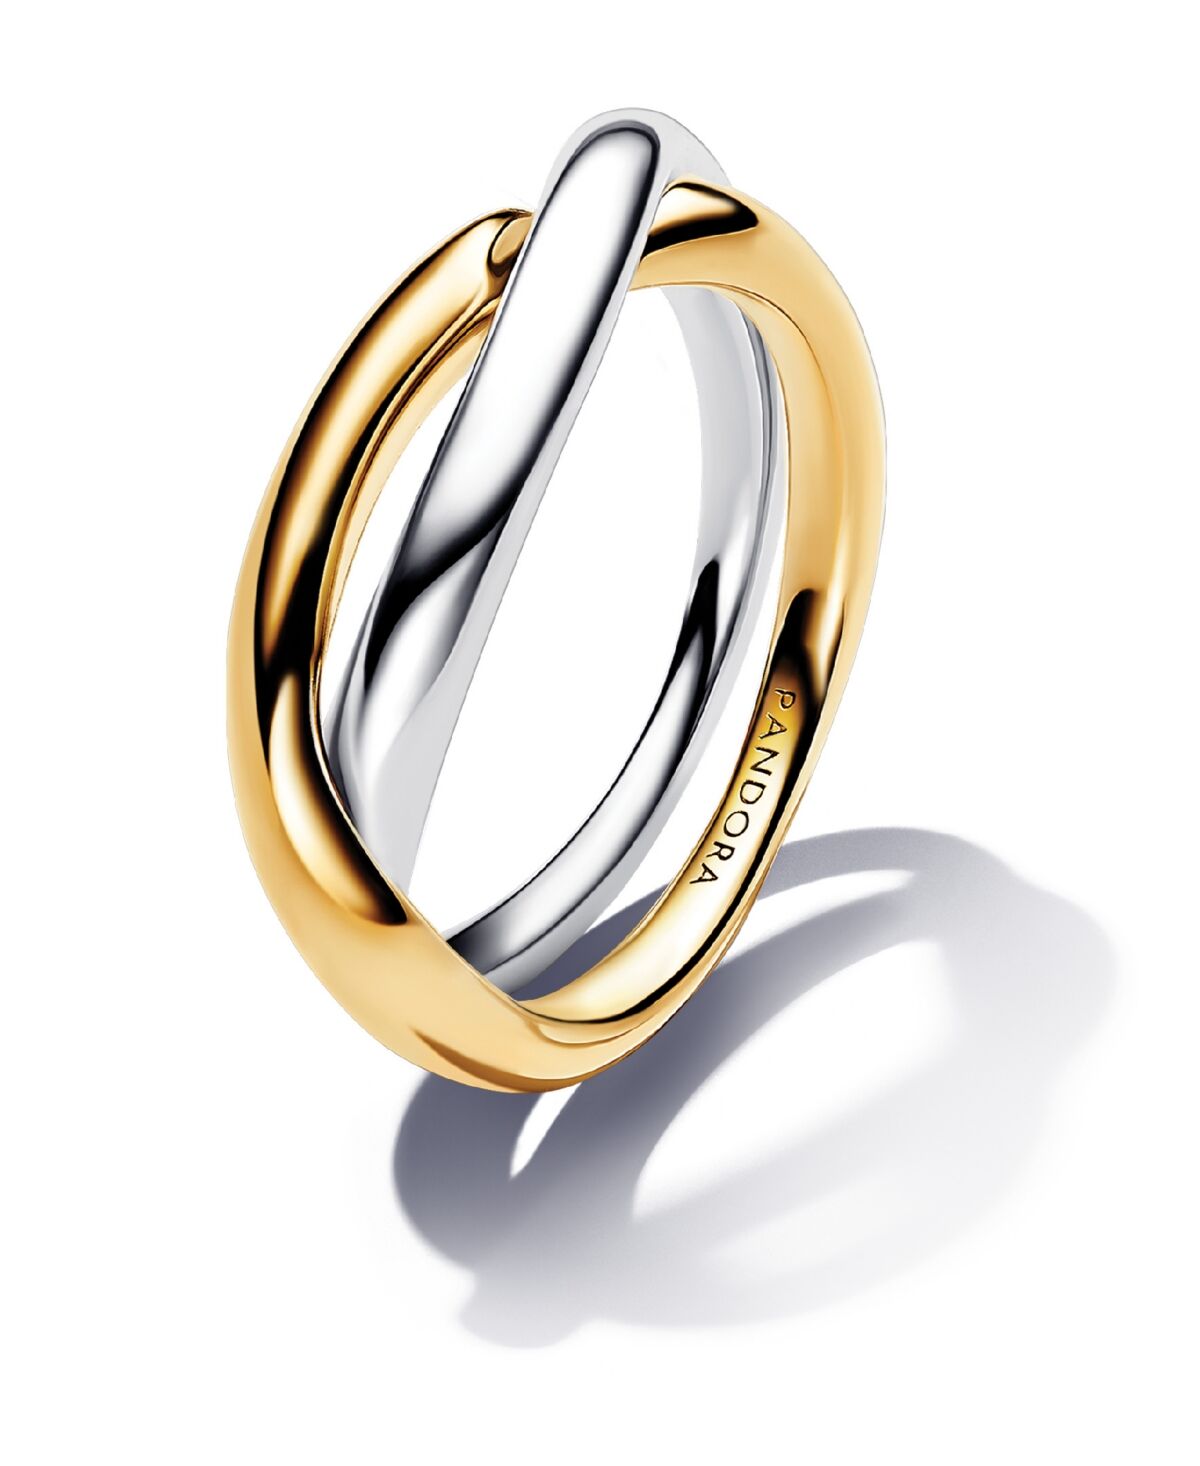 Pandora Two-tone Entwined Bands Ring in Sterling Silver and 14k Gold-plated - Silver Gold